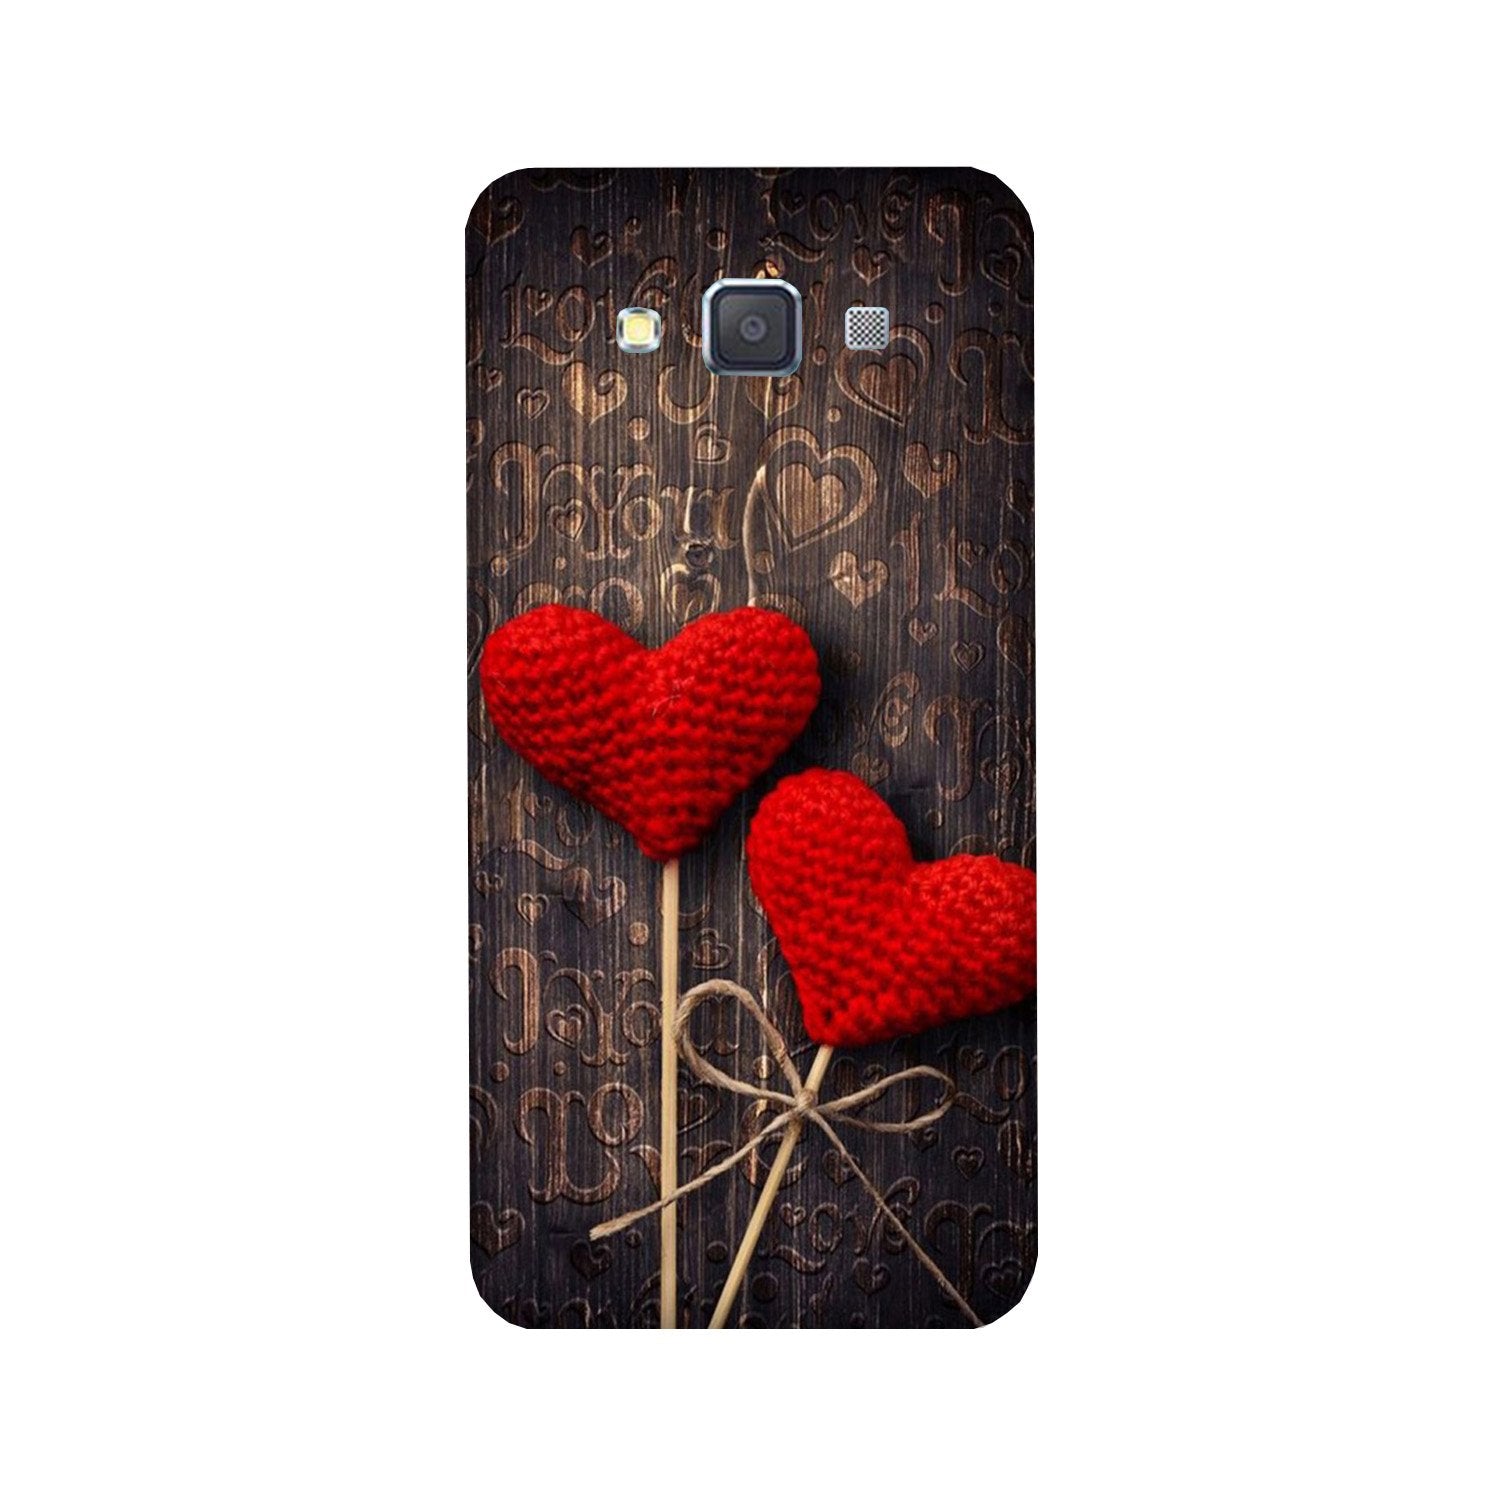 Red Hearts Case for Galaxy A3 (2015)